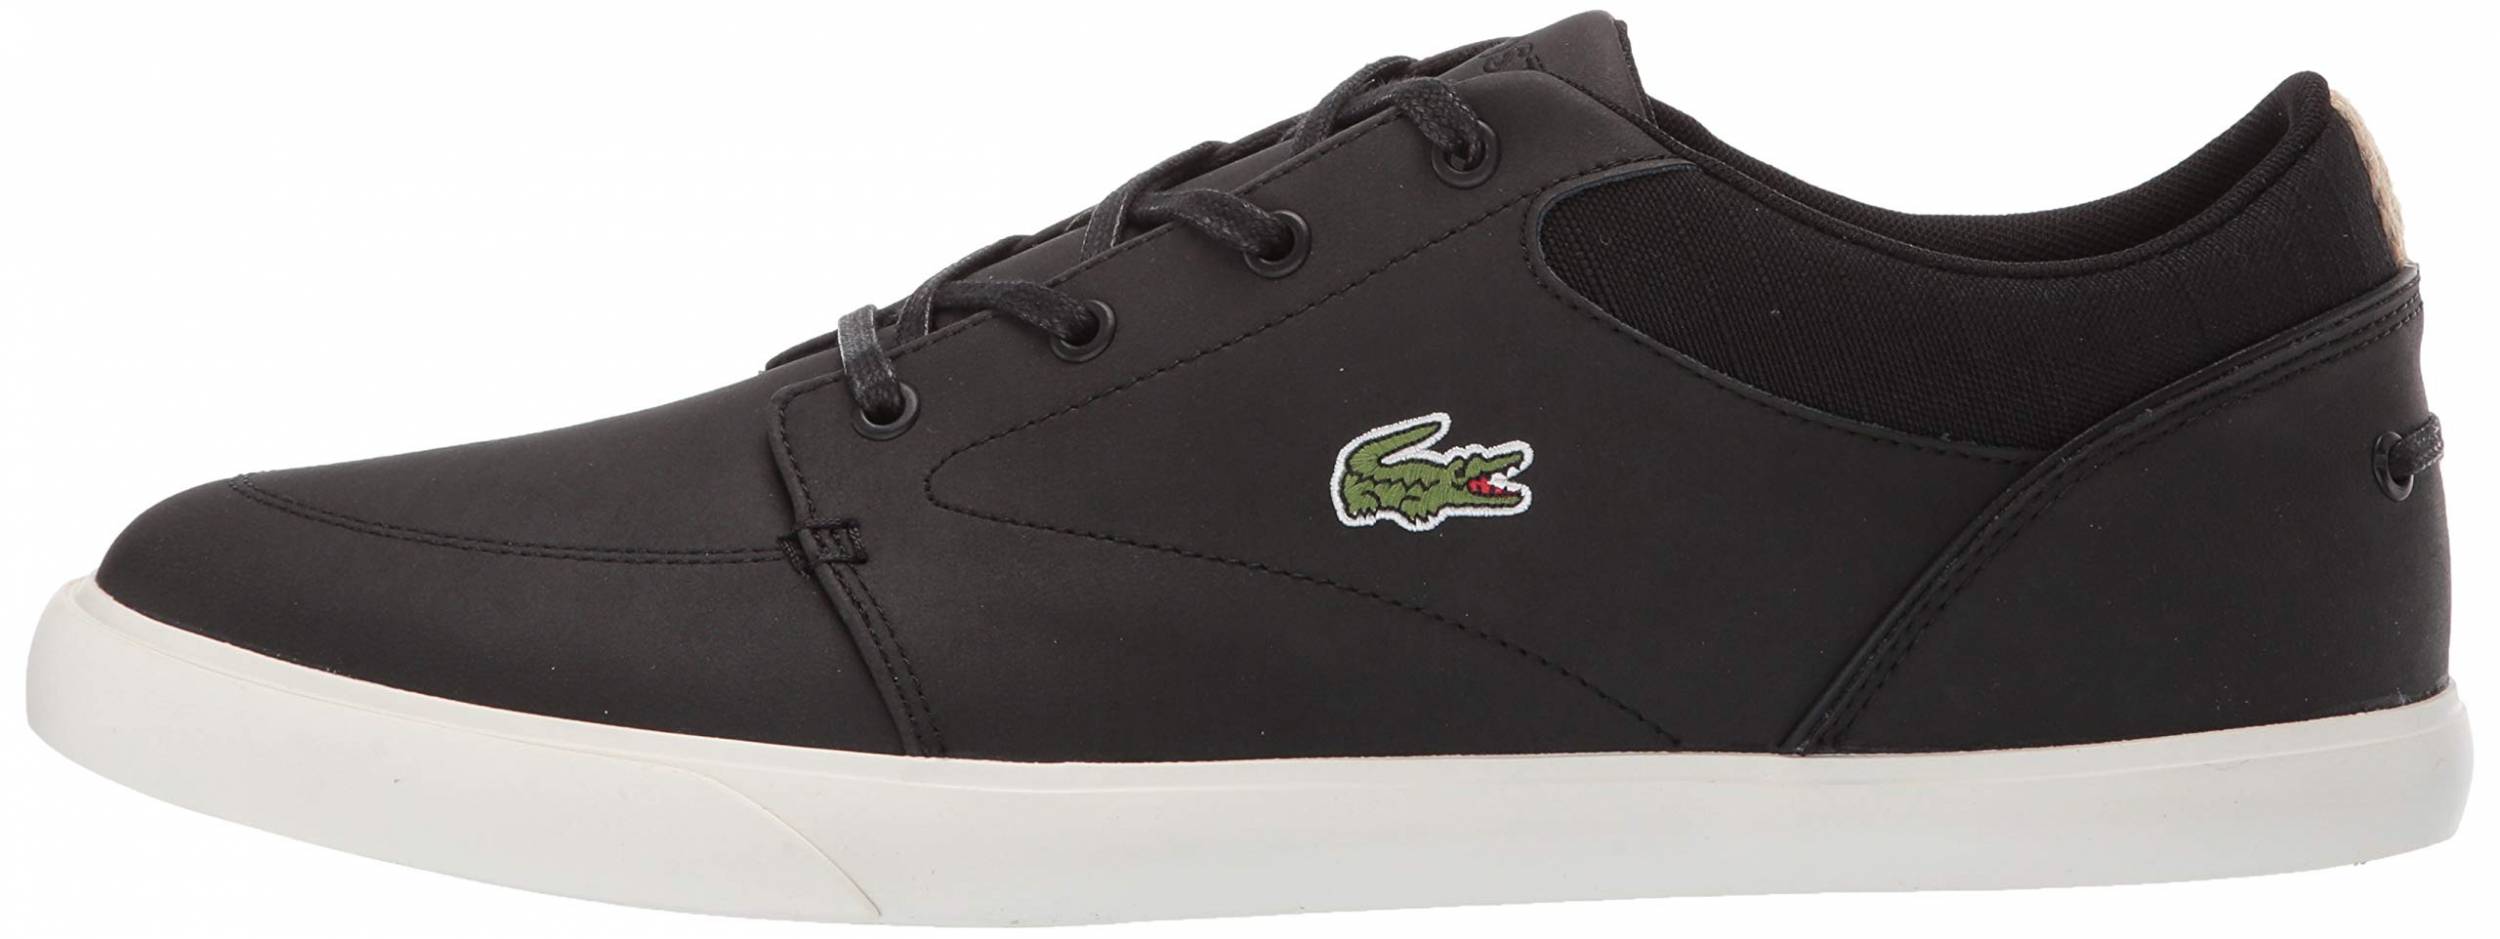 lacoste trainers womens black